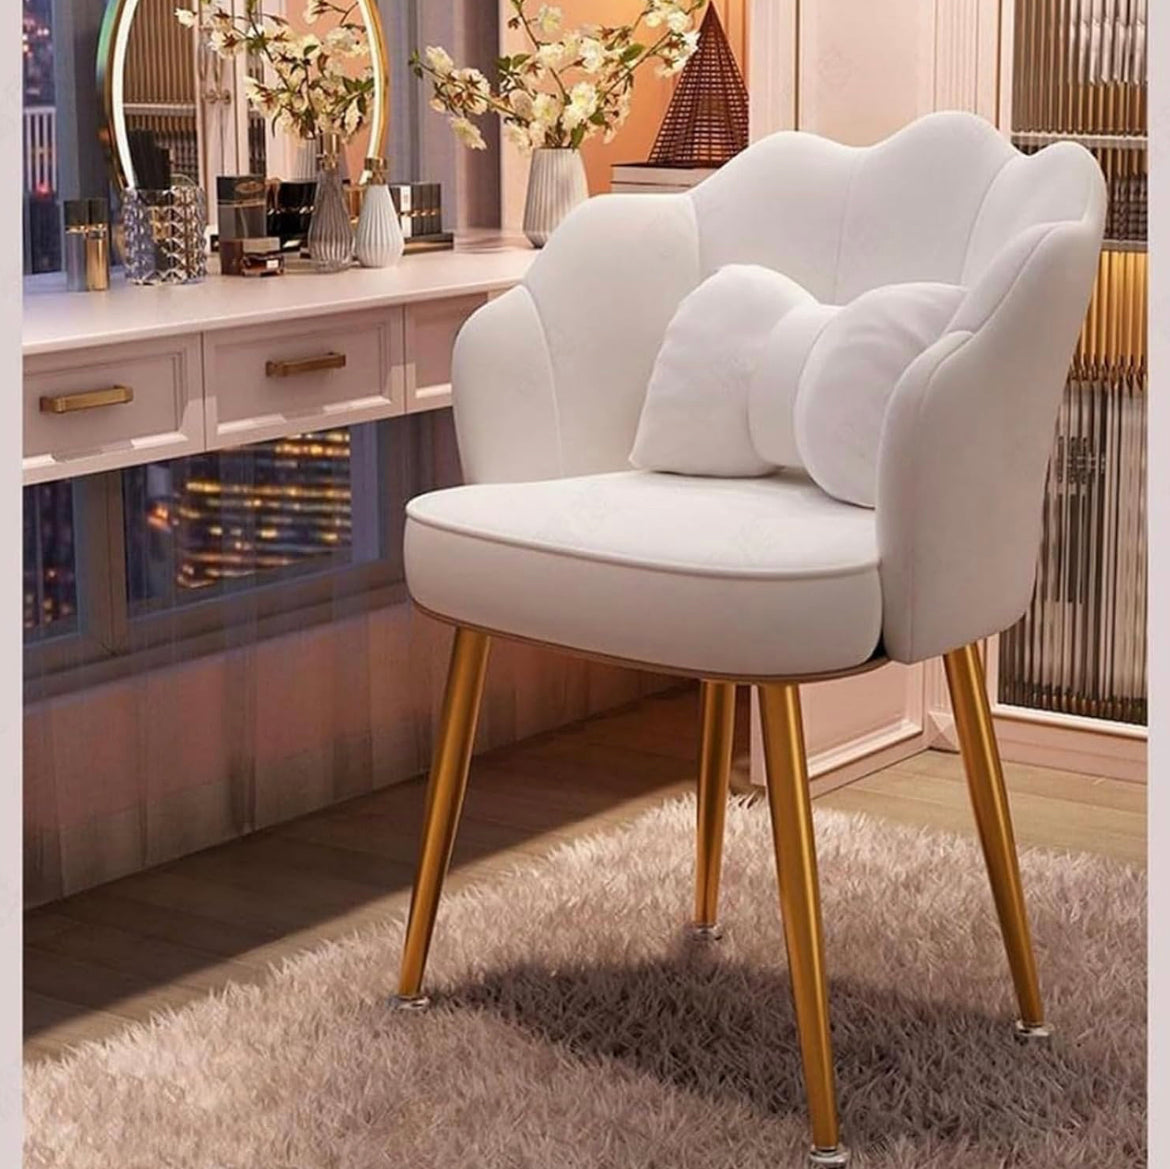 Floral Vanity Chair Soft Accent Chair Accent Chaise Chair for Living Room/Bed Room Shell Shape Vanity Chairs with Petal Metal Legs Stylish and Functional